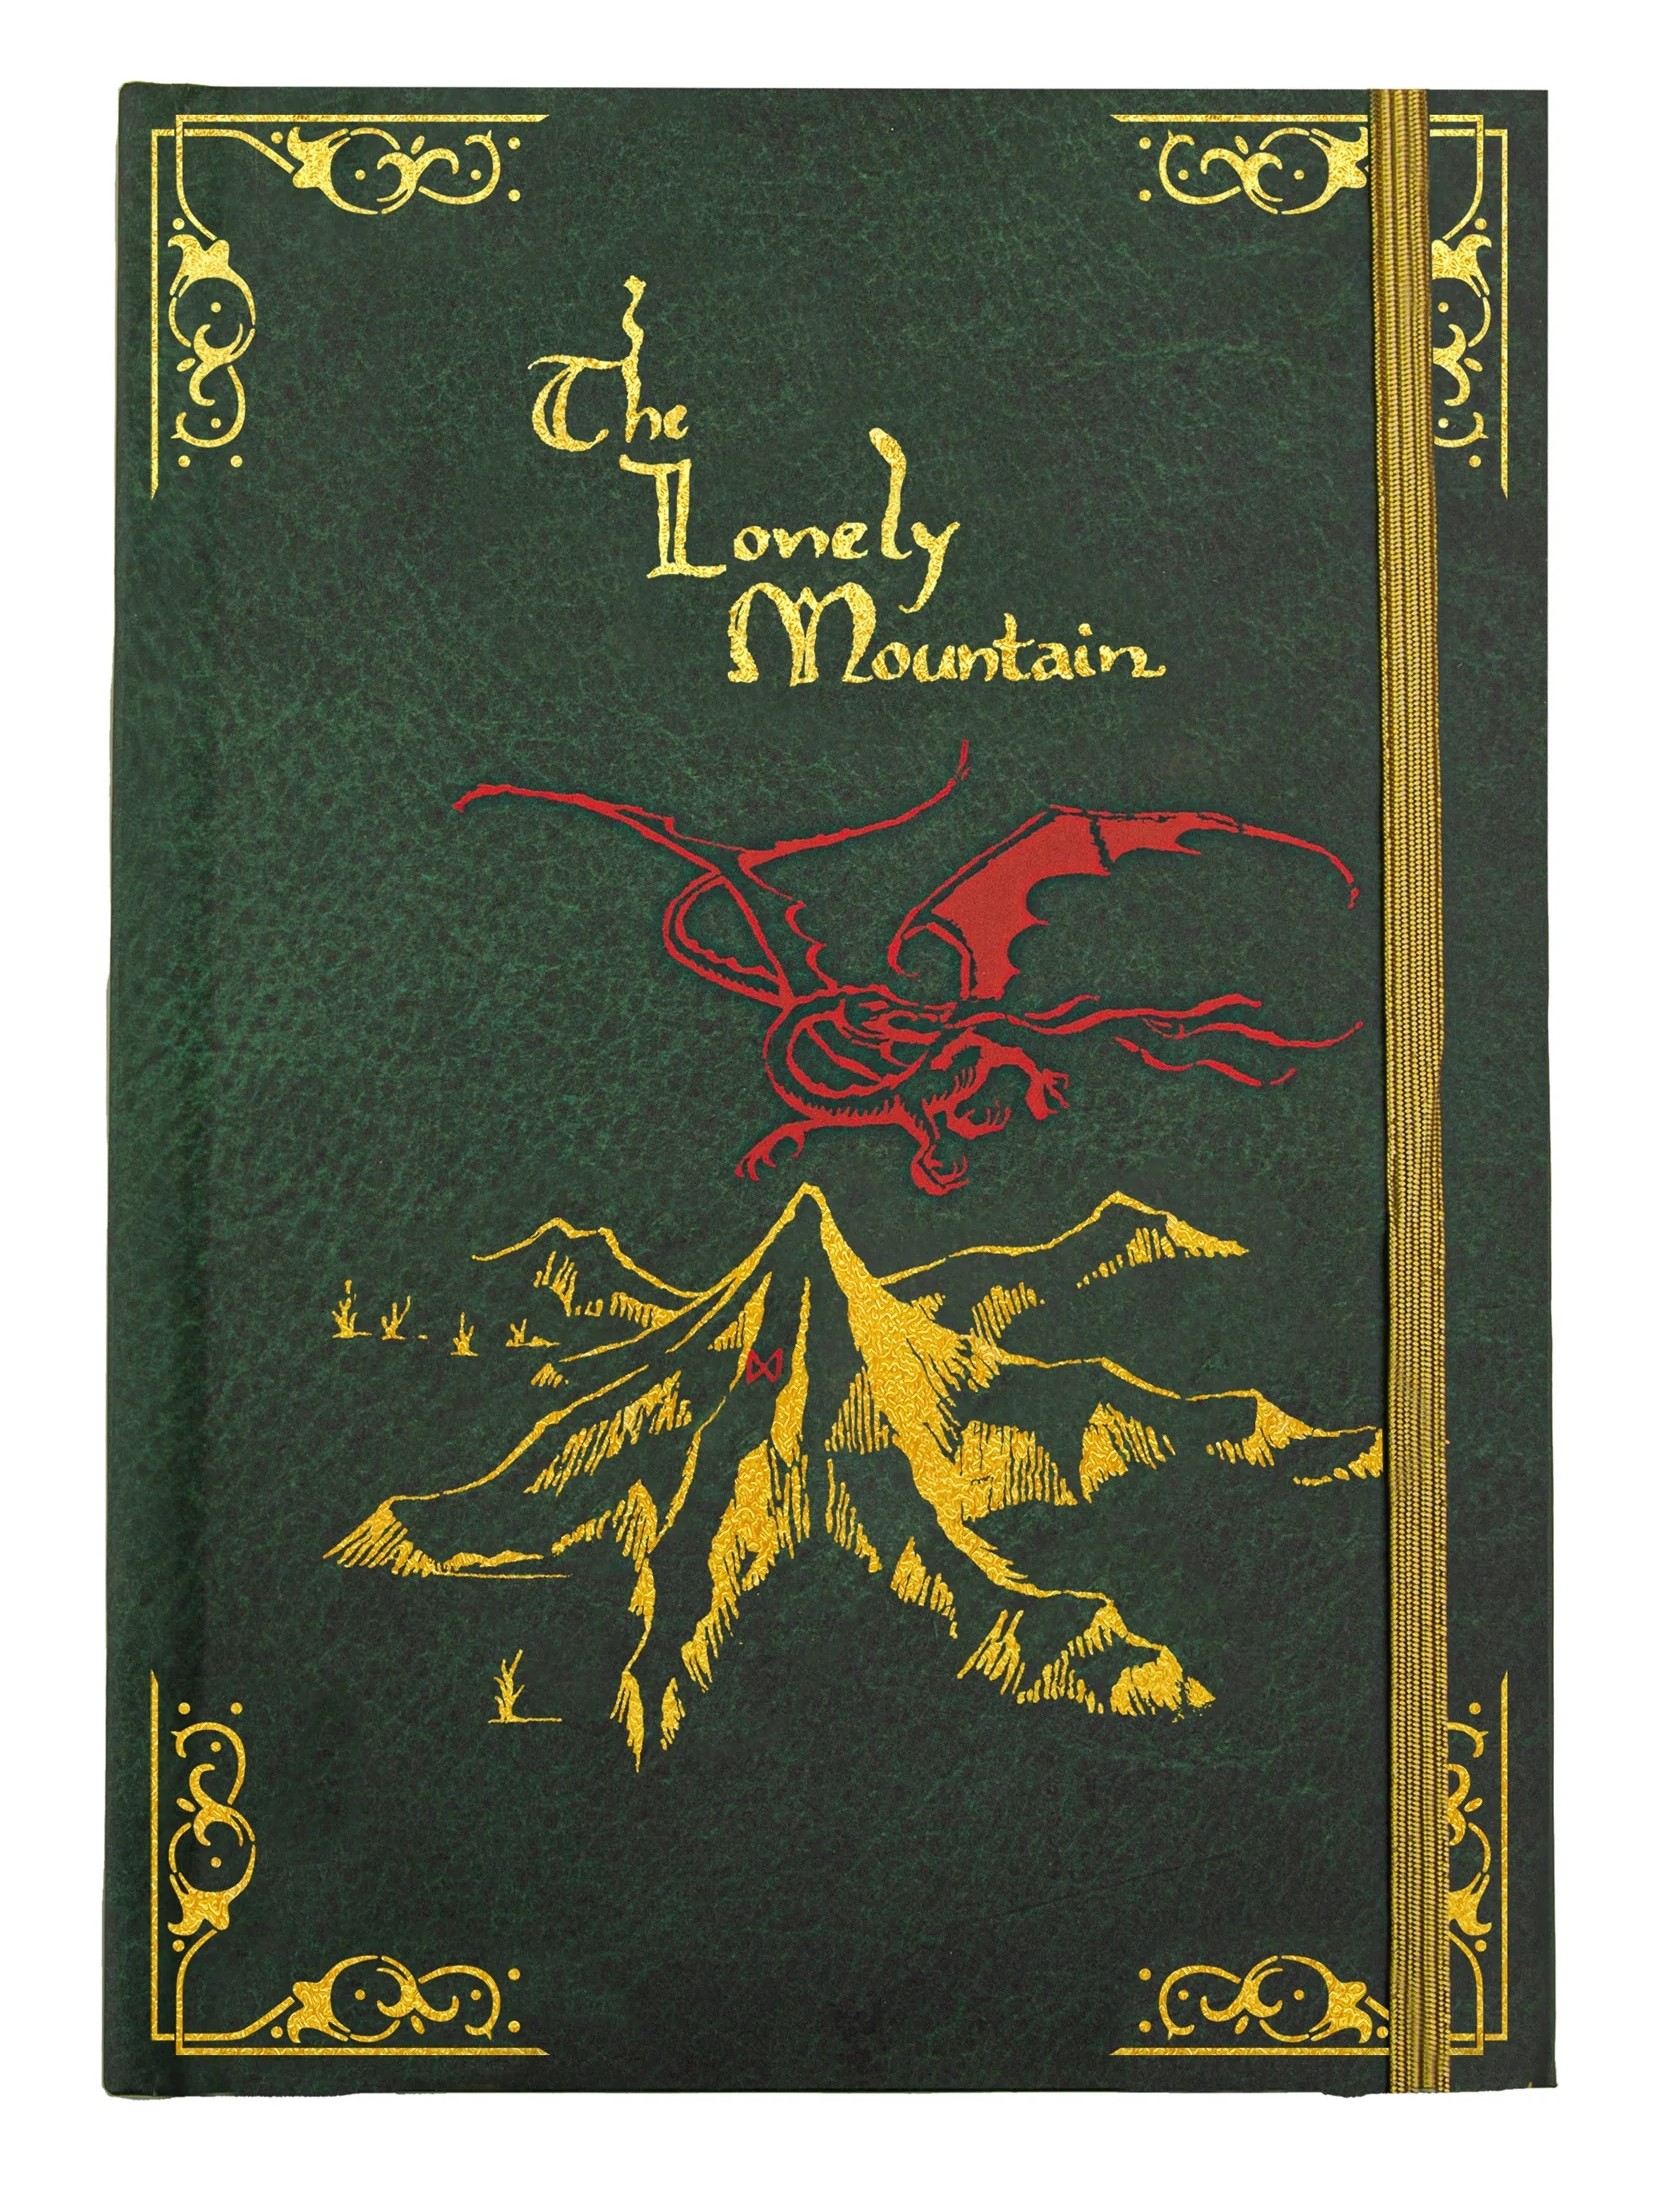 Carnet - The Hobbit - The Lonely Mountain